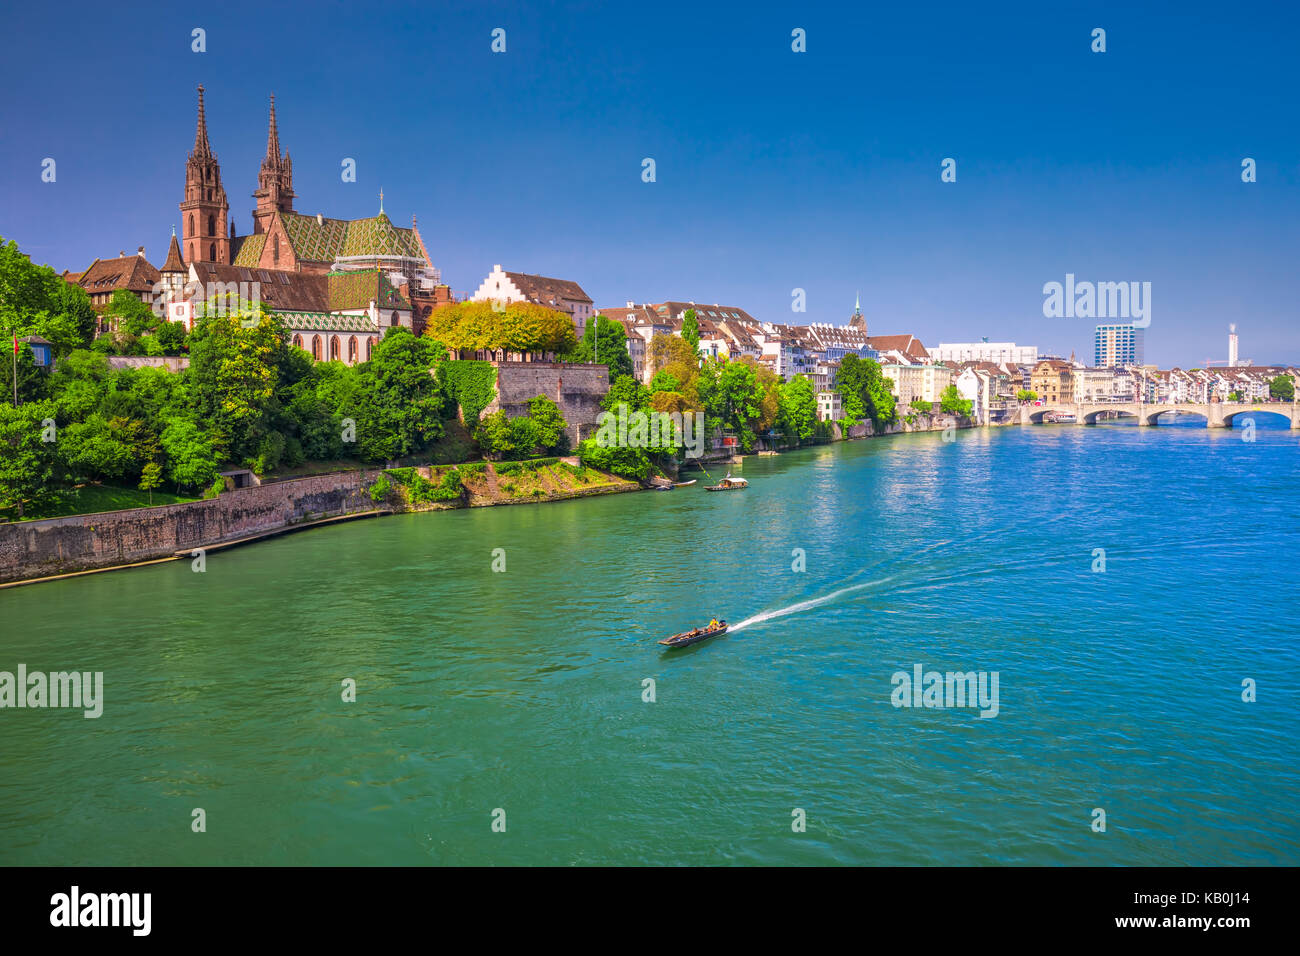 Old city center of Basel with Munster cathedral and the Rhine river, Switzerland, Europe. Basel is a city in northwestern Switzerland on the river Rhi Stock Photo